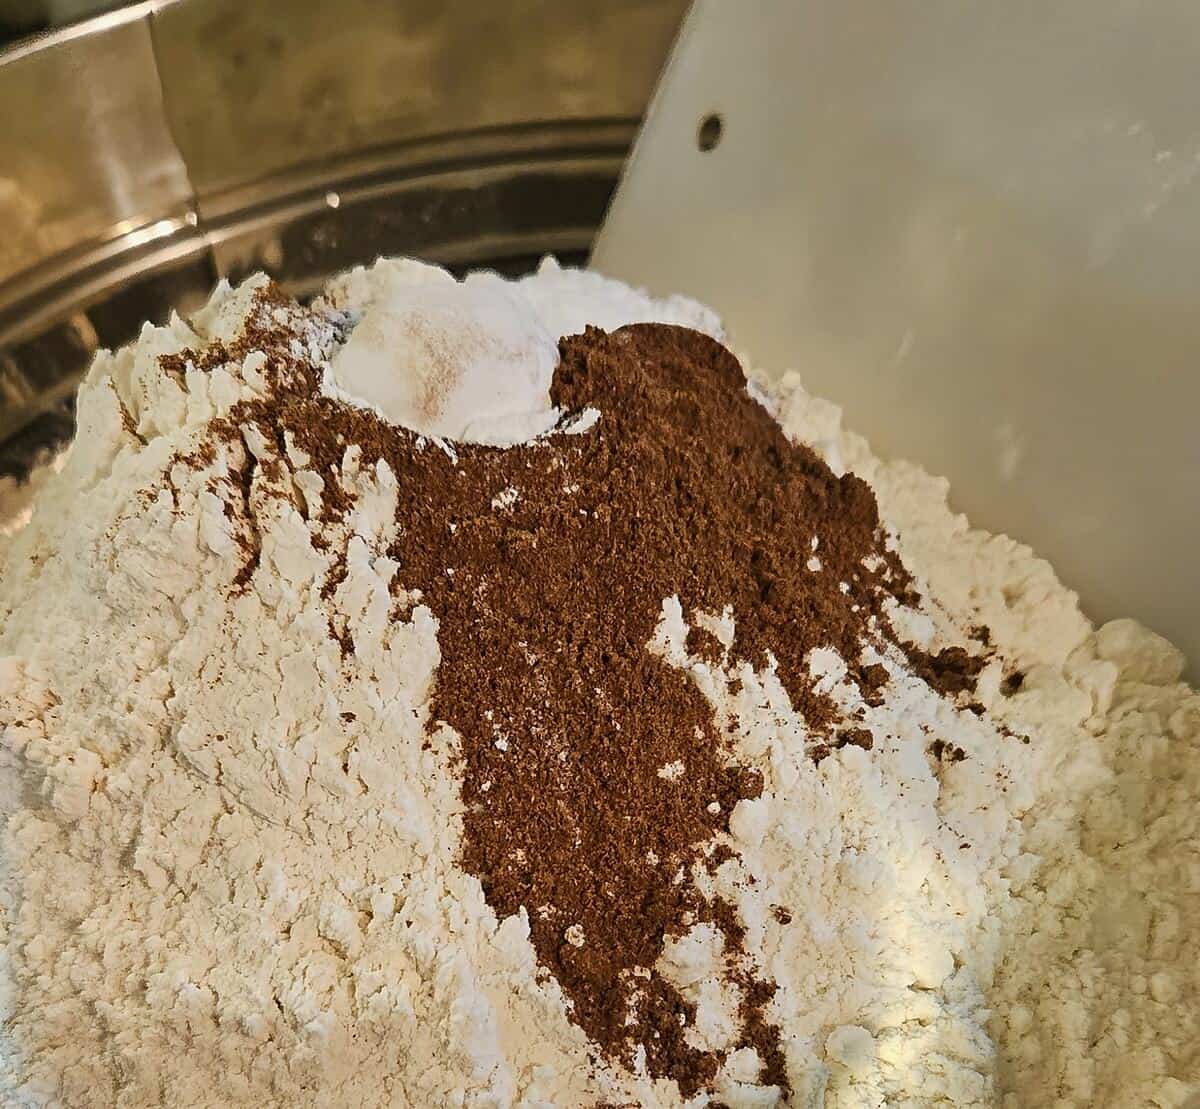 whoopie pie dry batter ingredients in a drum seive prepared to be sifted together